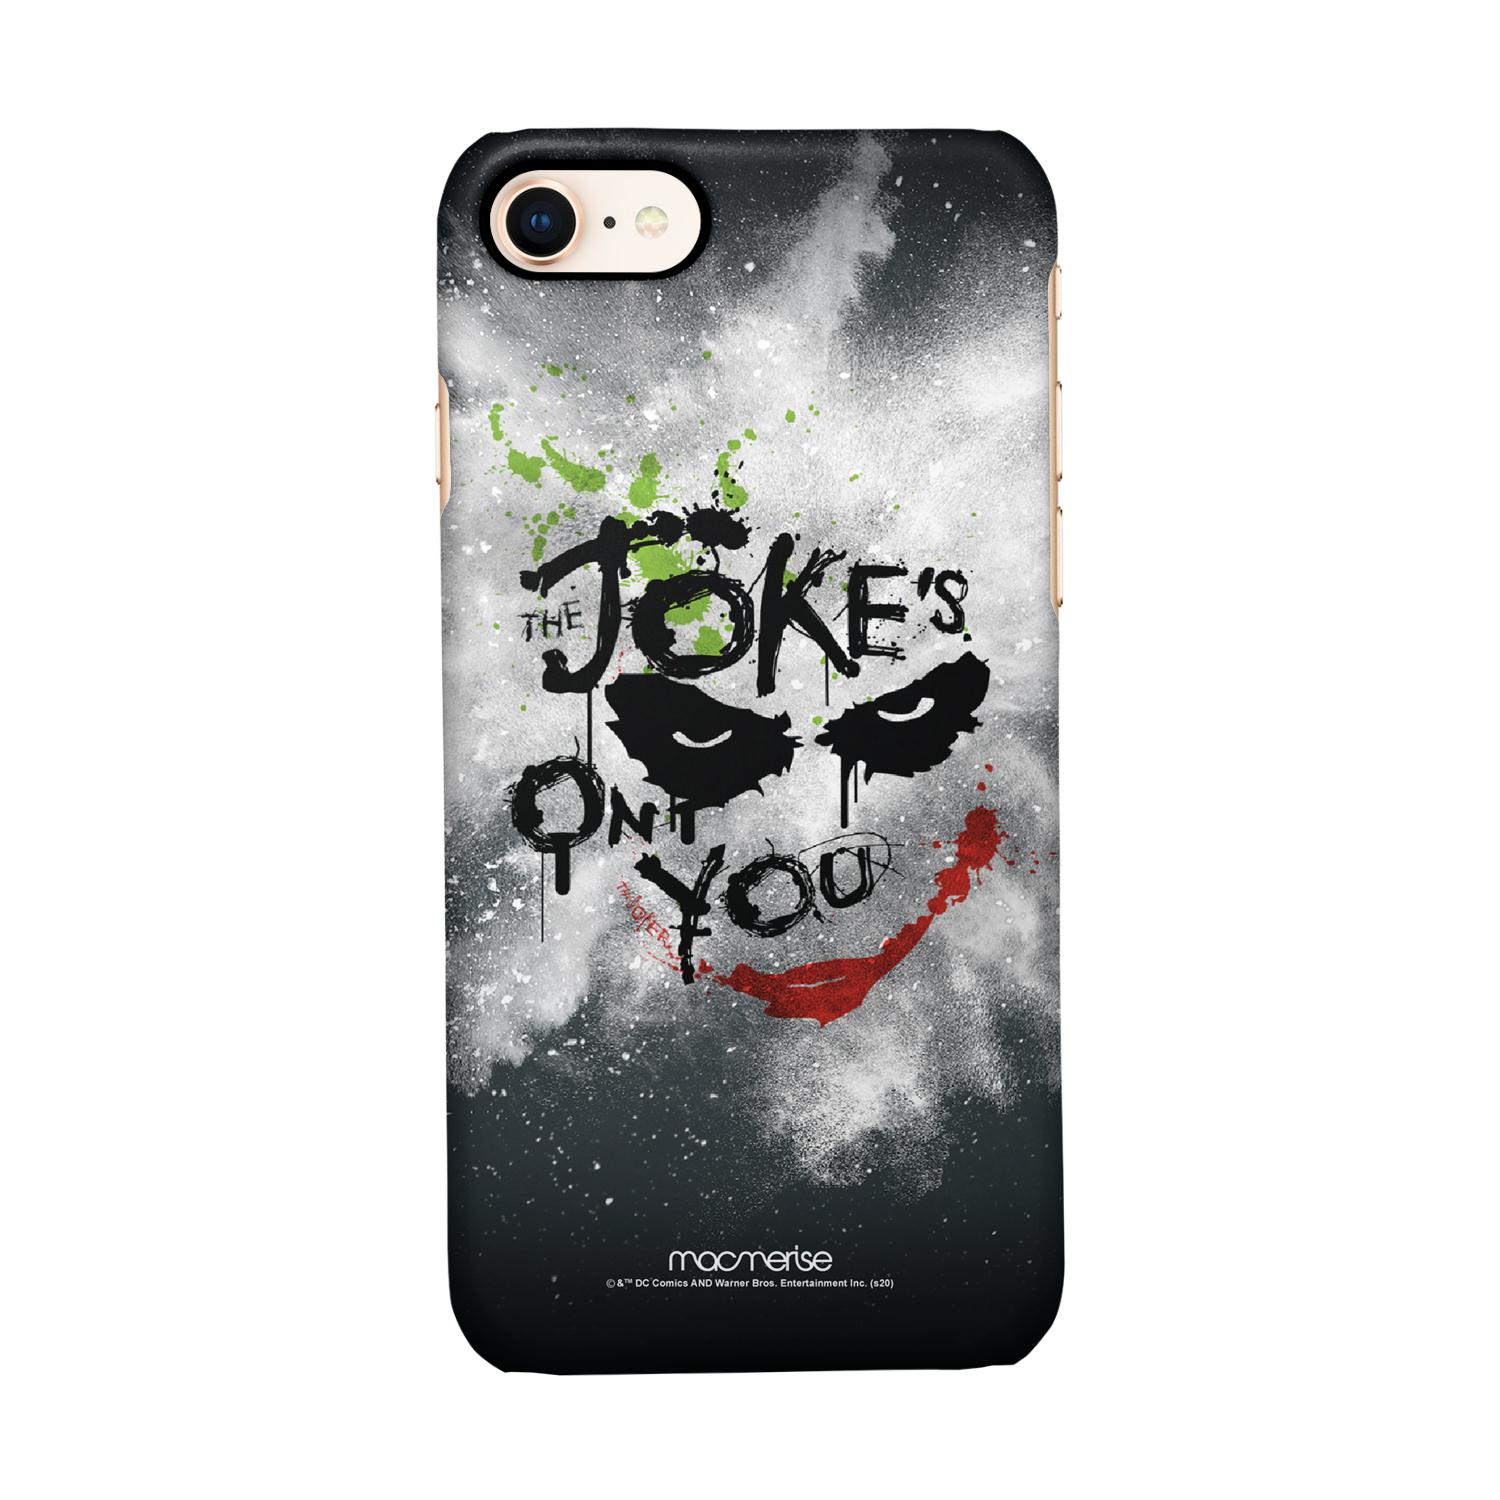 Buy The Jokes on you - Sleek Phone Case for iPhone 7 Online